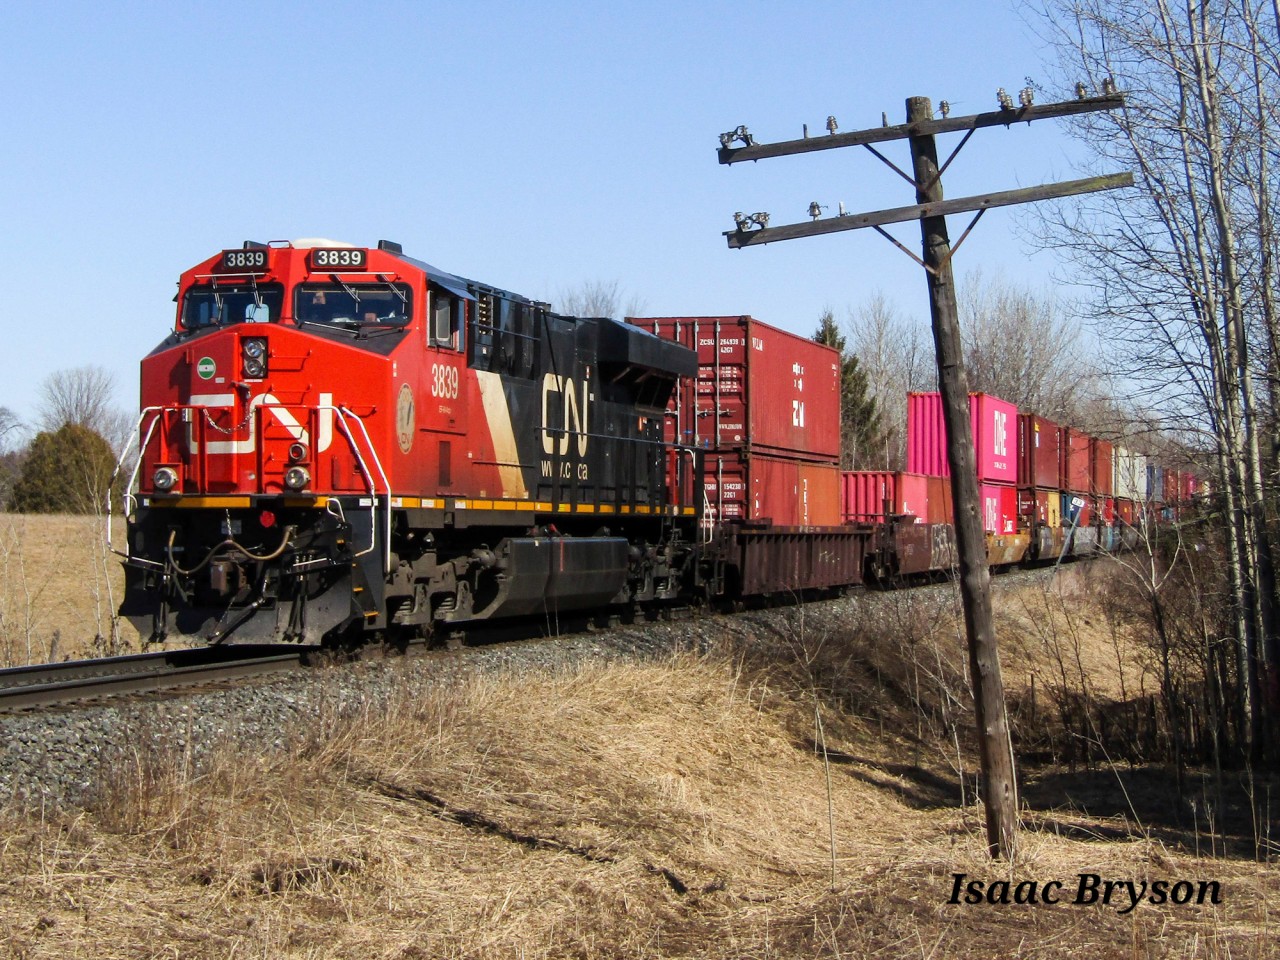 CN 101 flies northbound approaching Pine Orchard Ontario with CN 3839 Rear DPU pushing hard. It passes a telegraph pole, a once important railway artifact, now disappearing throughout Canada. This one is not in the greatest state, leaning nicely towards the train.